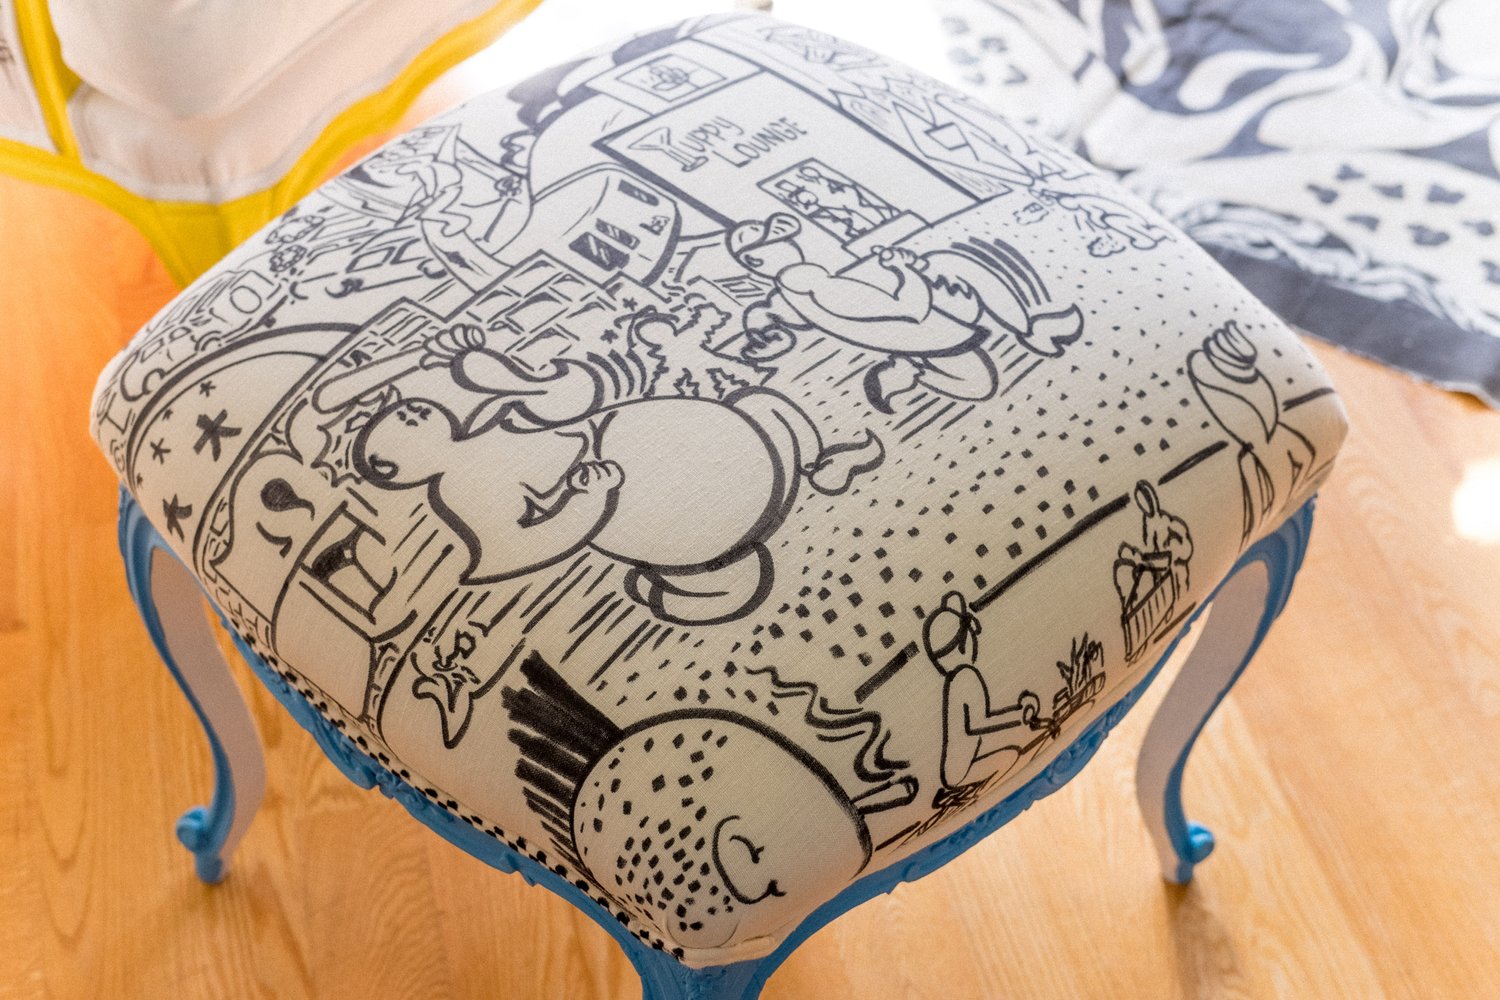 The image shows a stool with blue legs featuring a cushion adorned with whimsical black-and-white cartoons, including various characters and scenes in an urban setting.